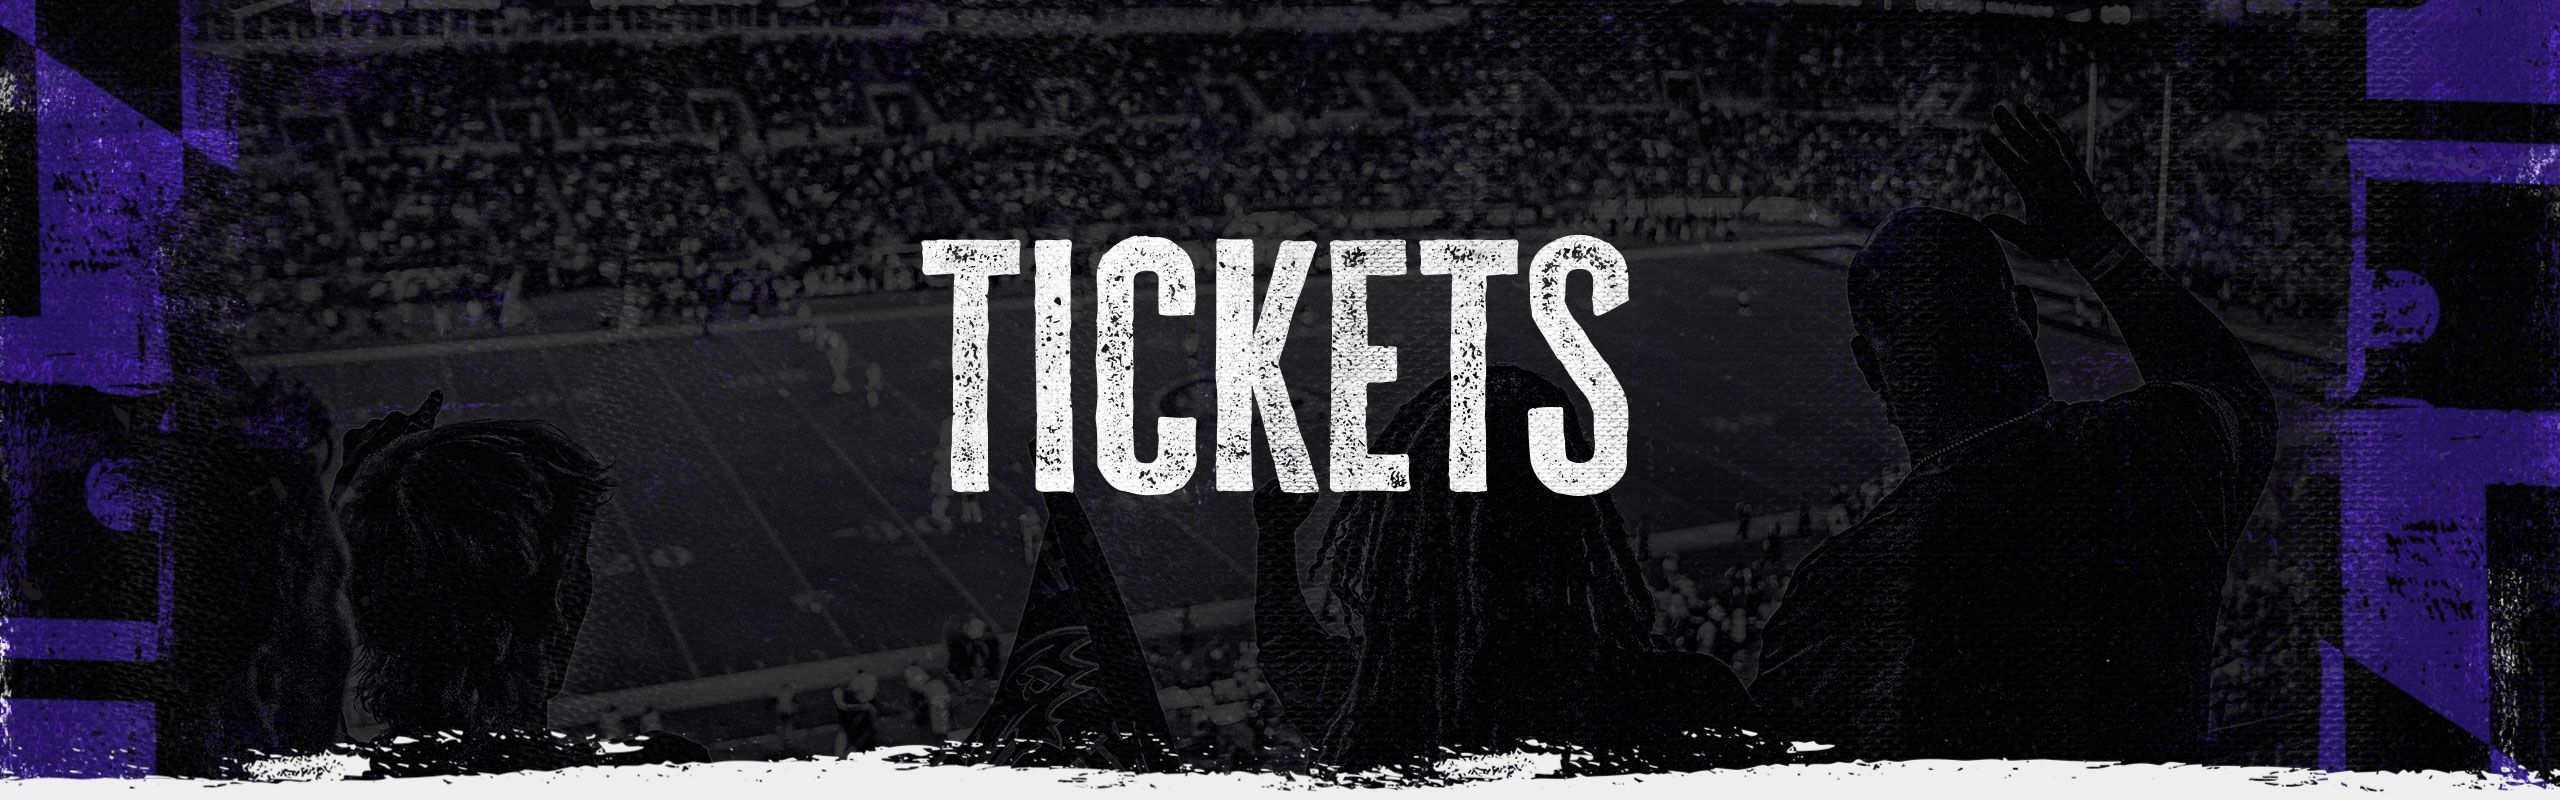 How To Find The Cheapest NFL Playoff Tickets + Face Value Options